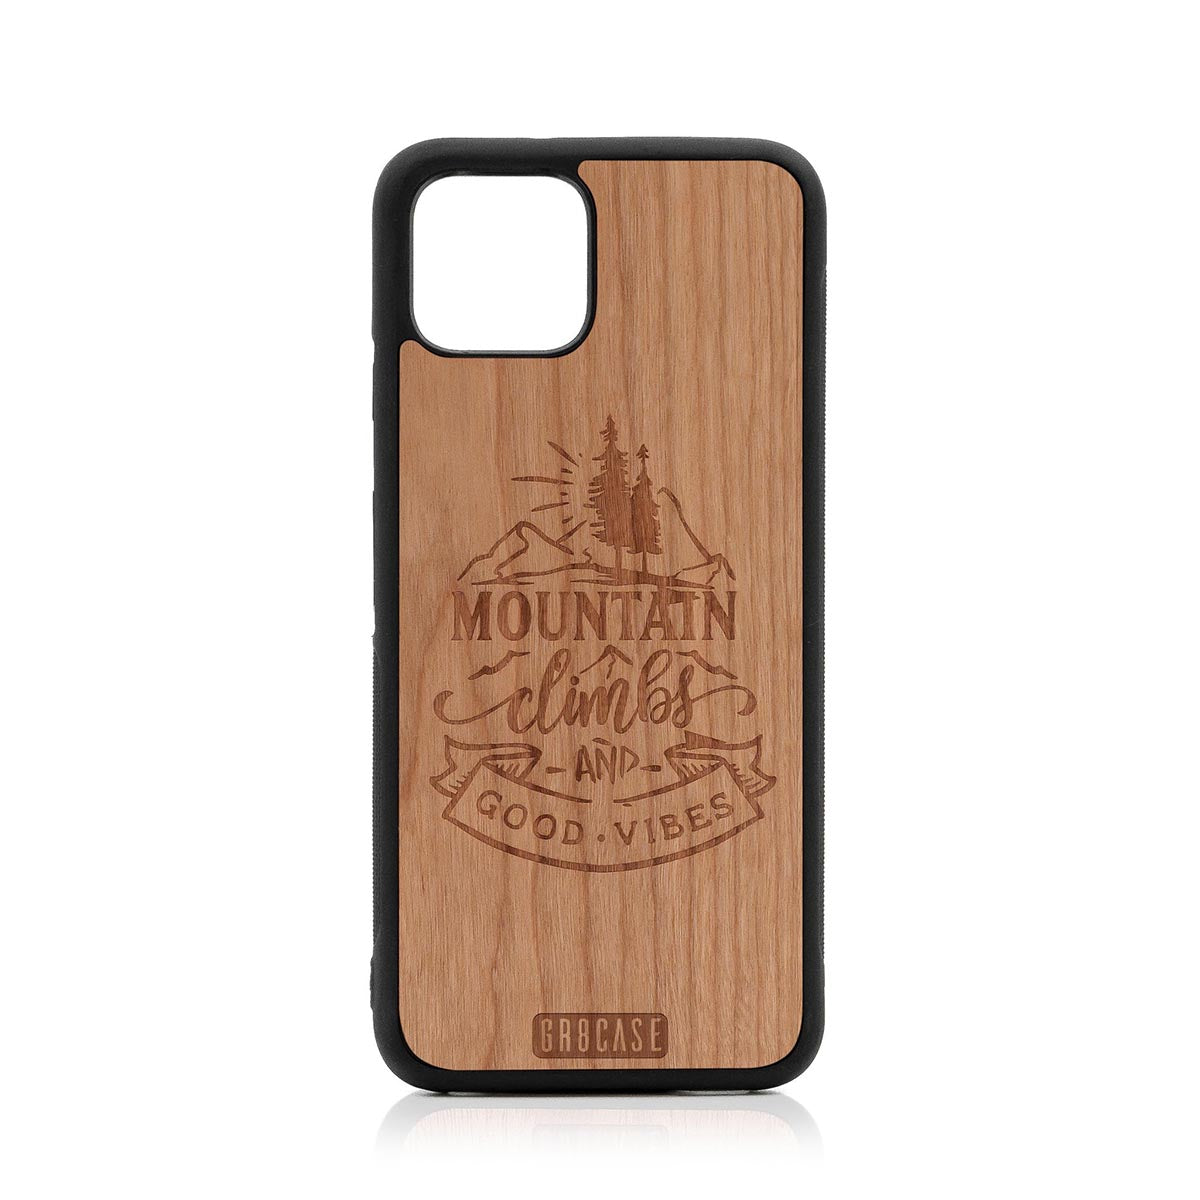 Mountain Climbs And Good Vibes Design Wood Case Google Pixel 4 by GR8CASE